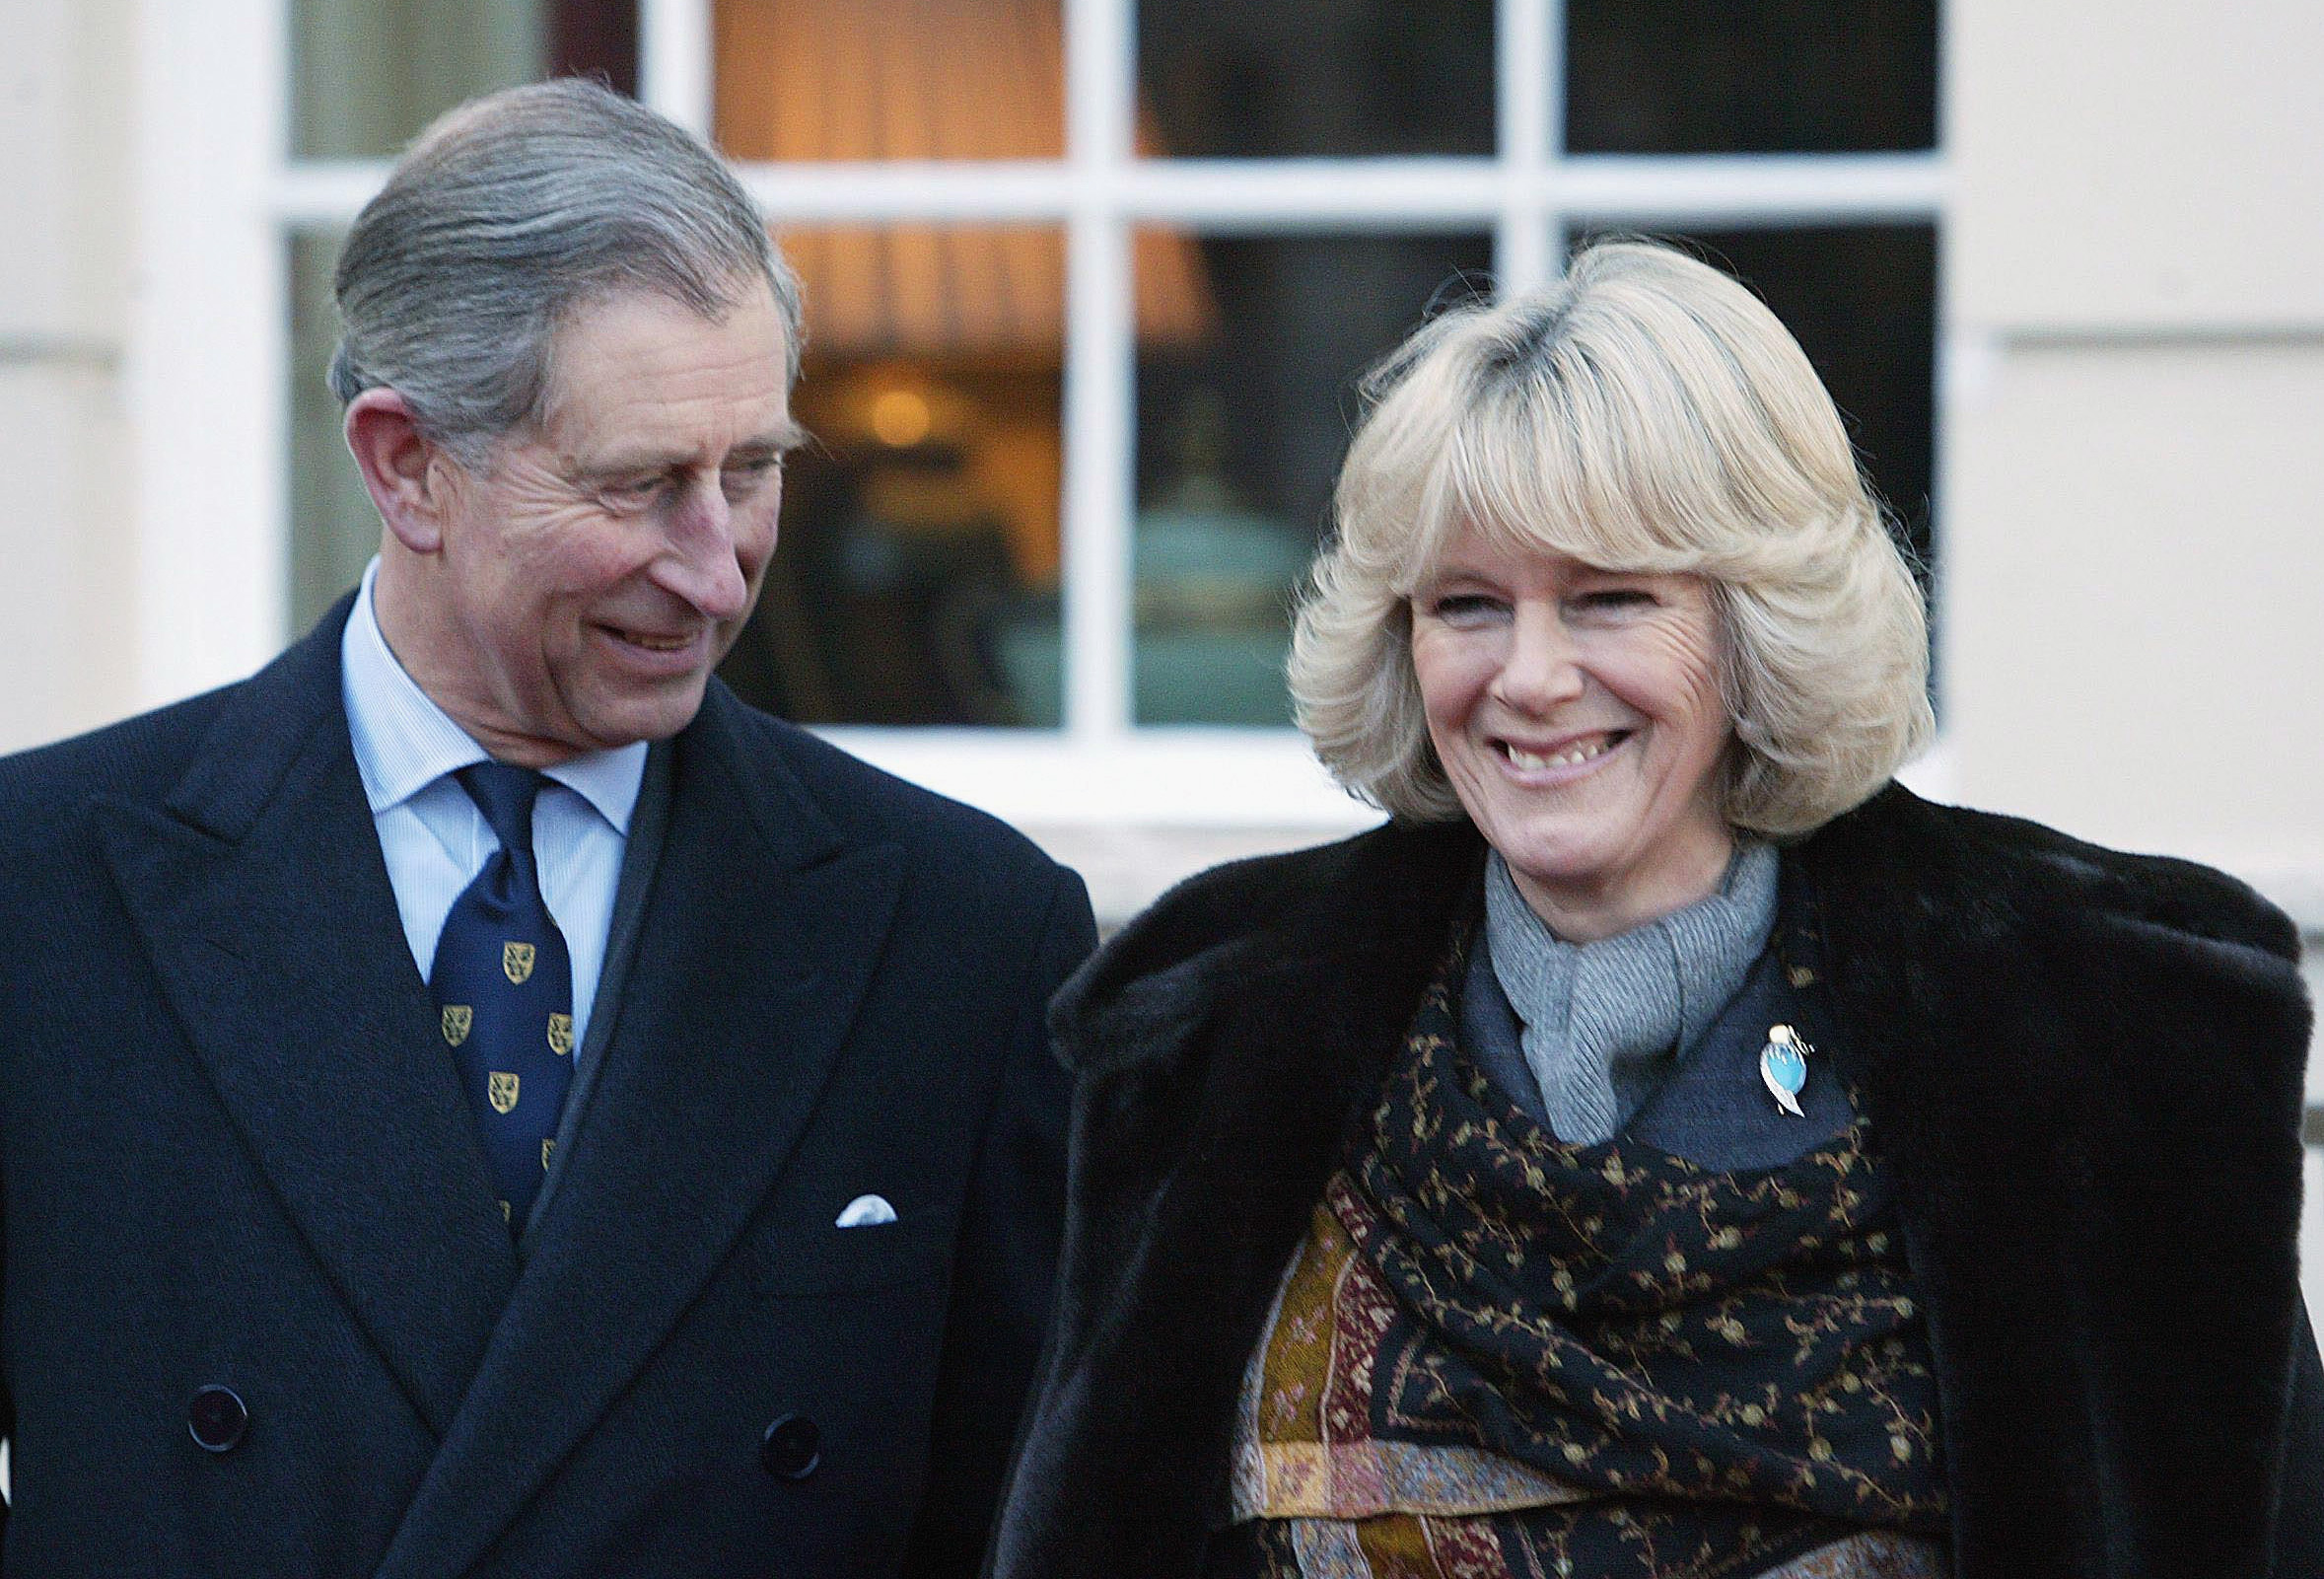 Prince Charles, Prince of Wales and Camilla Parker-Bowles, Duchess of Cornwall are seen as they meet a North Pole expedition team at Clarence House in London, on February 21, 2005. | Source: Getty Images